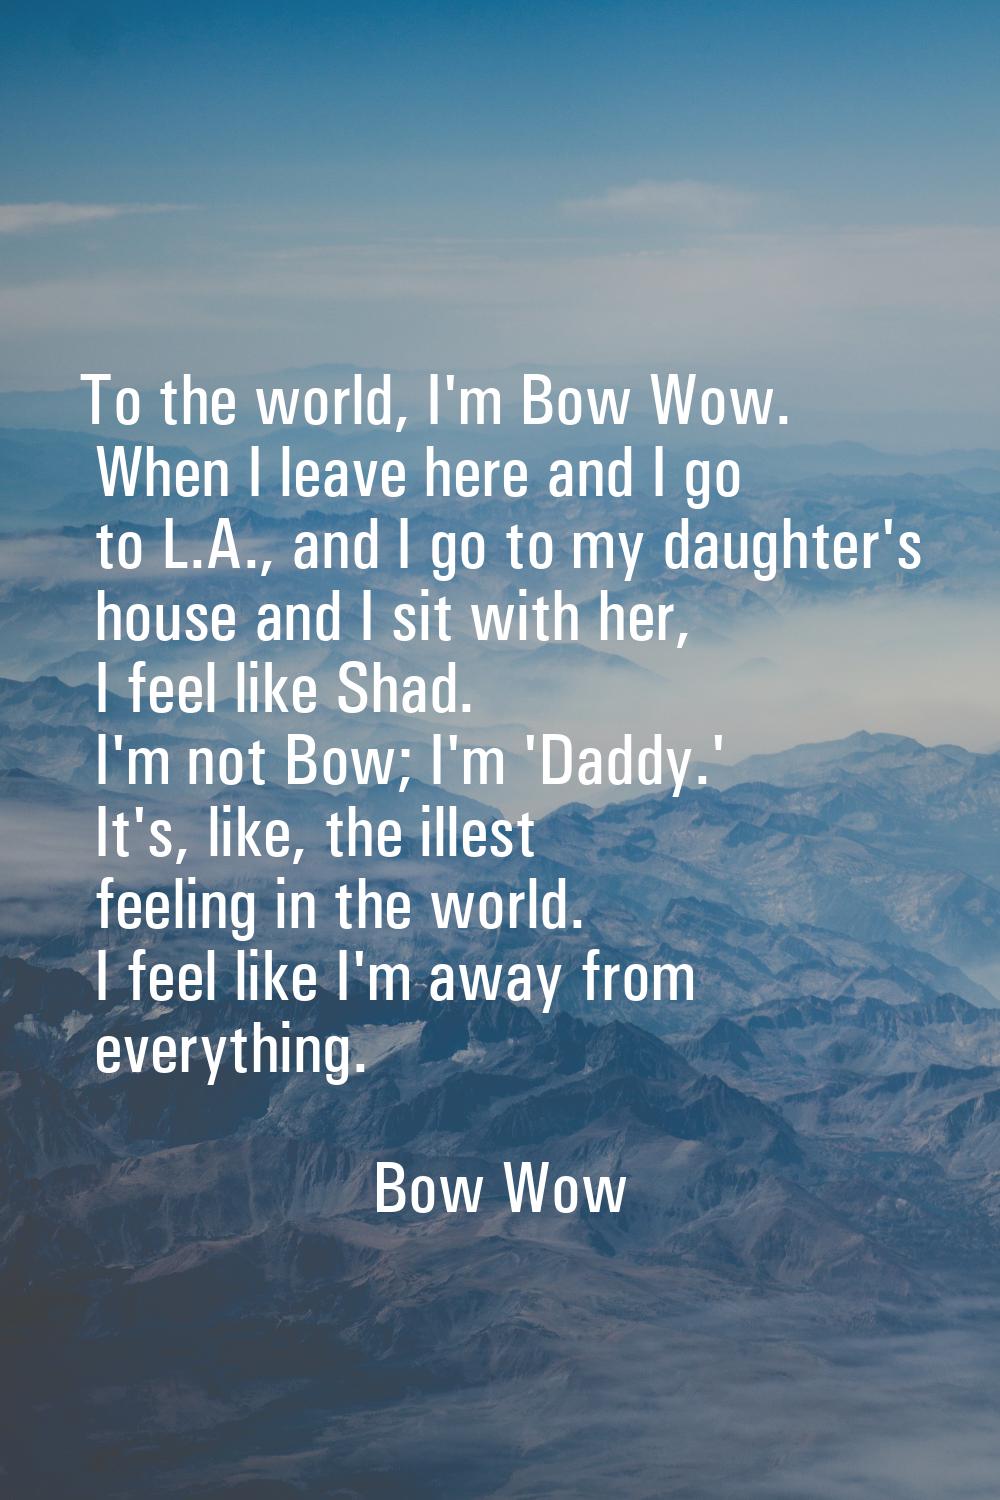 To the world, I'm Bow Wow. When I leave here and I go to L.A., and I go to my daughter's house and 